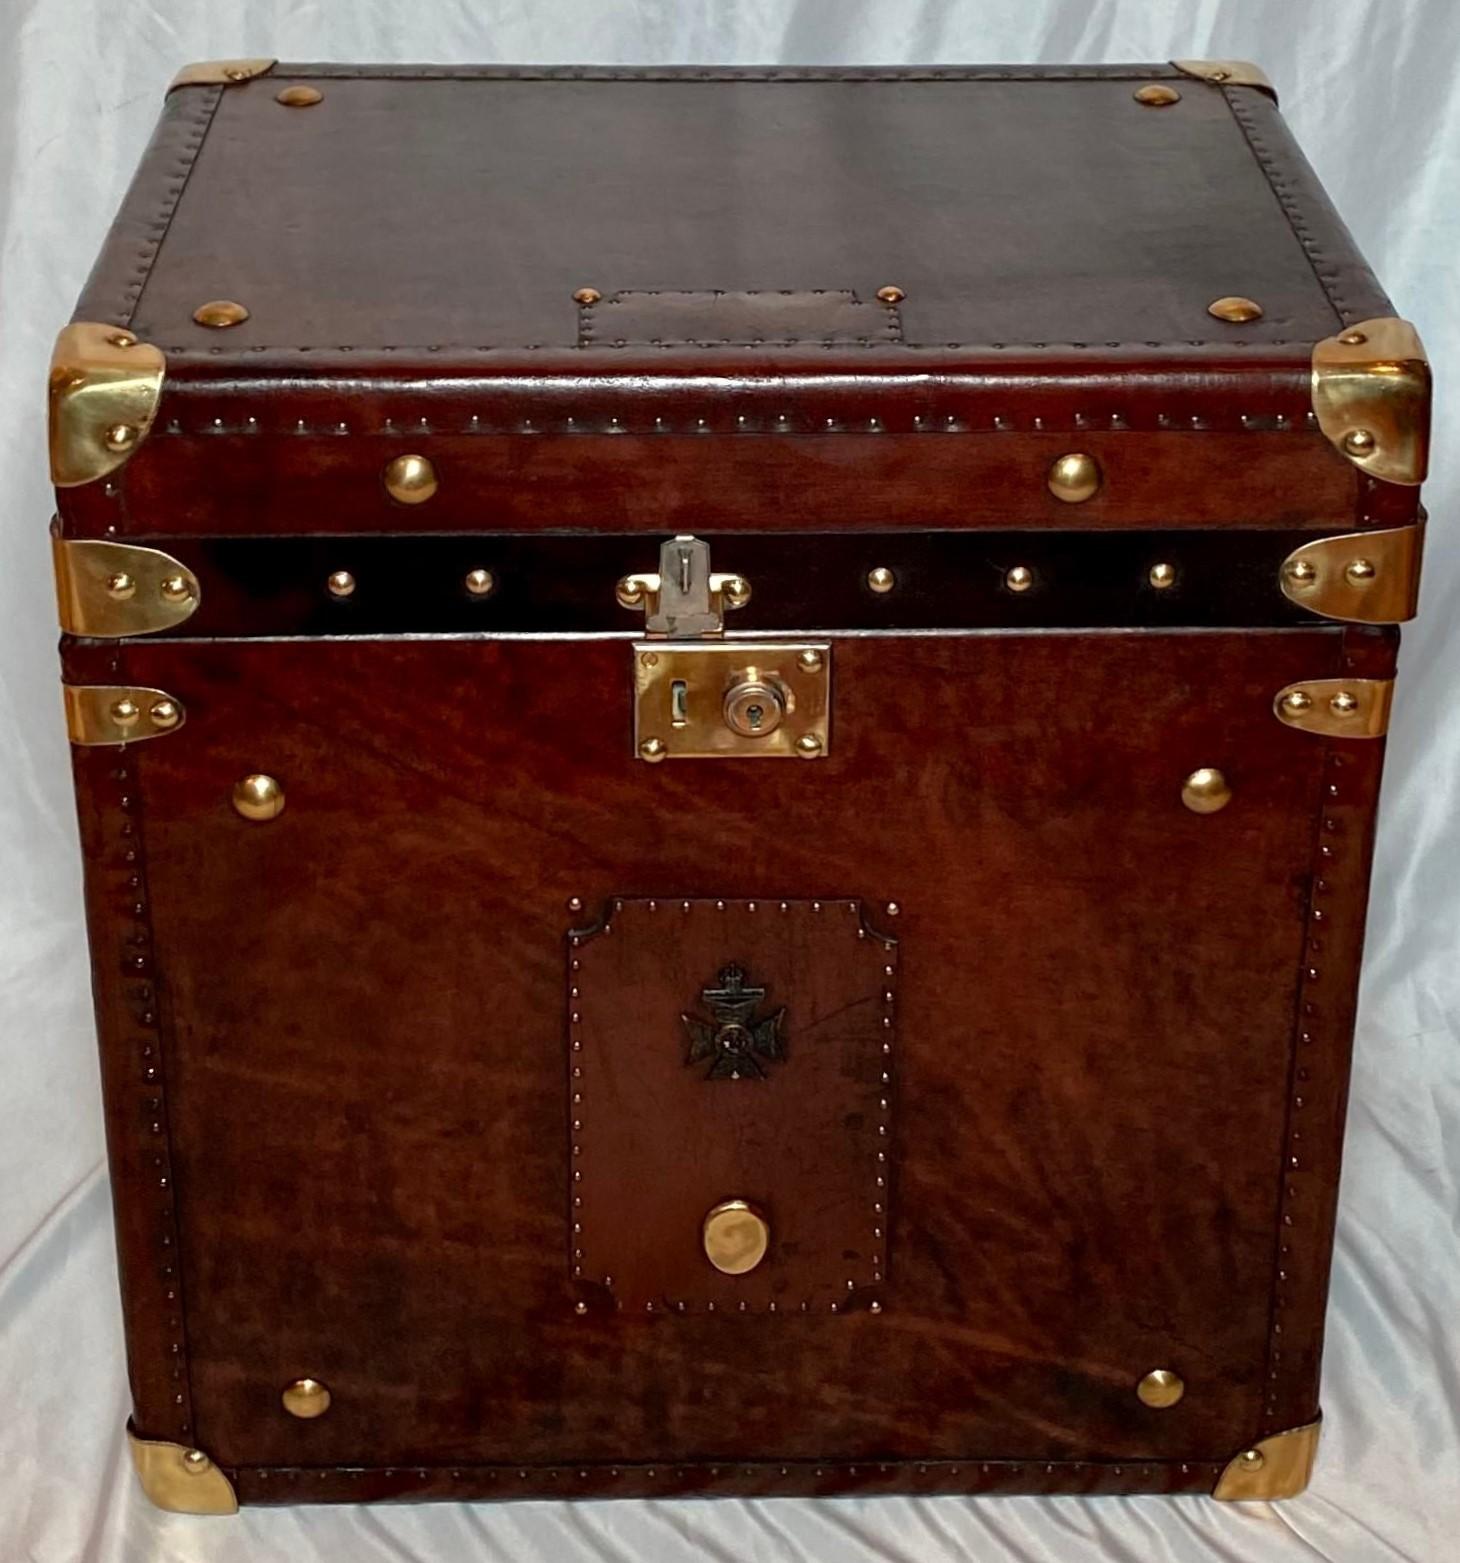 Pair antique 19th century British brass mounted leather military trunks.